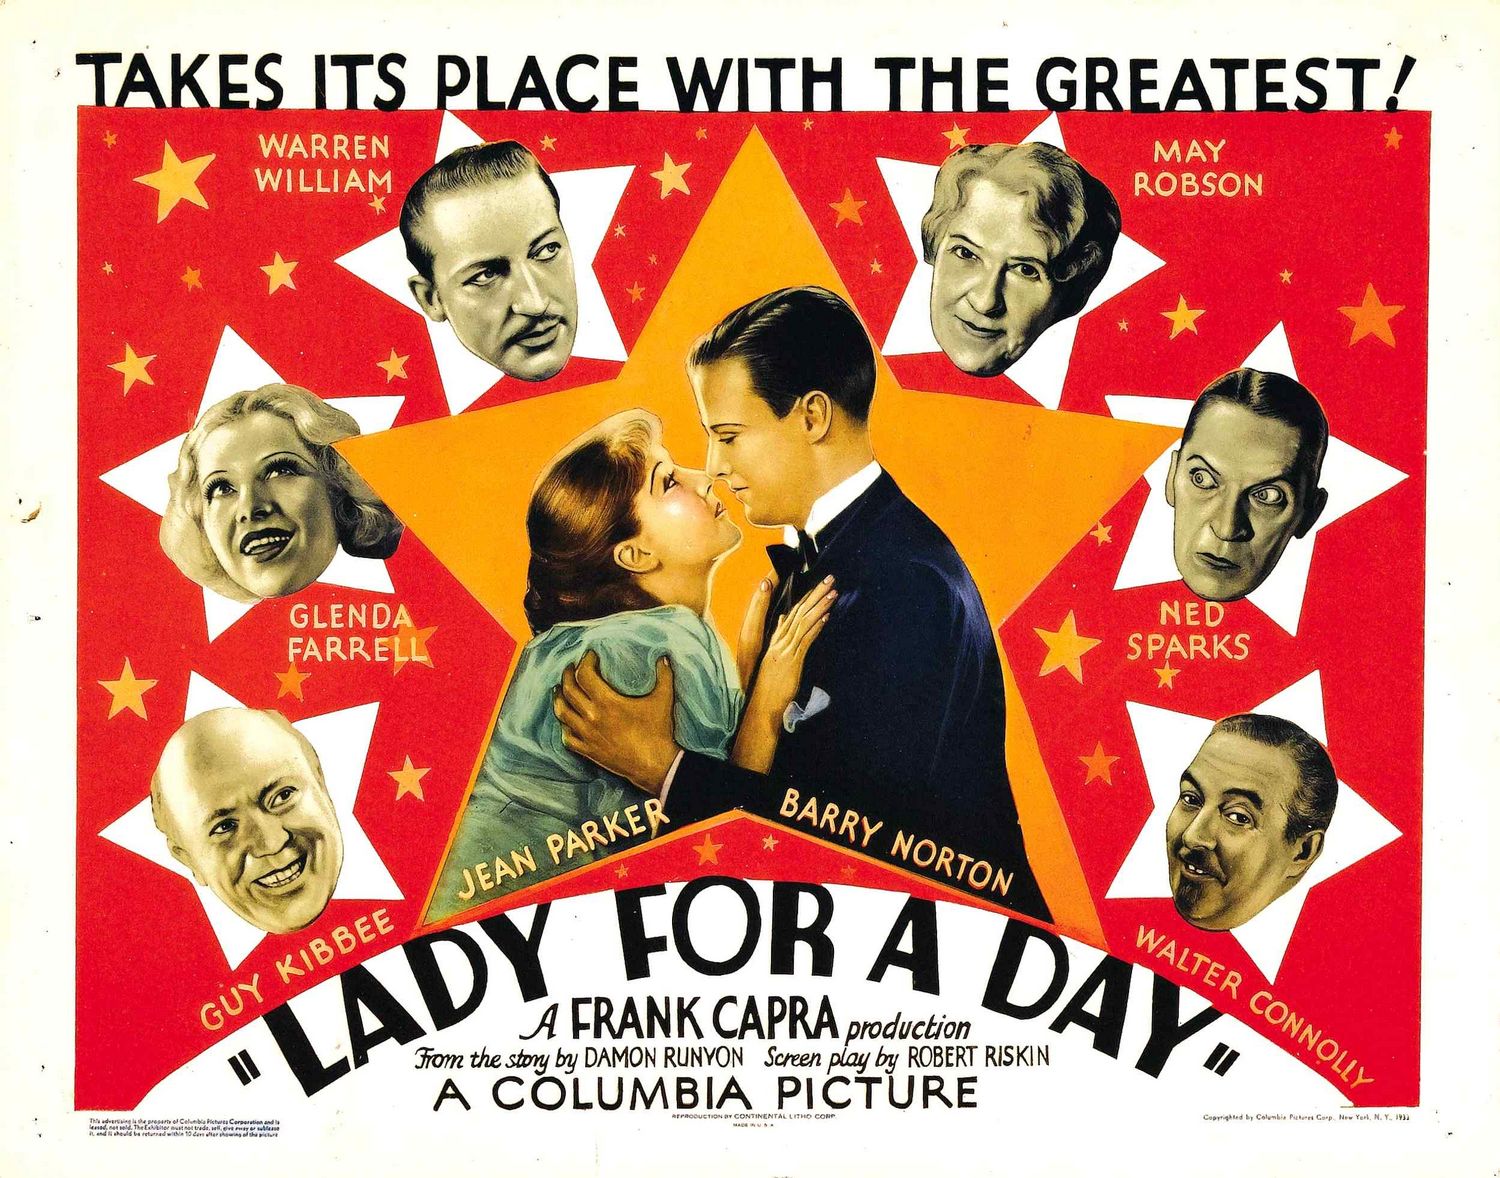 Extra Large Movie Poster Image for Lady for a Day 